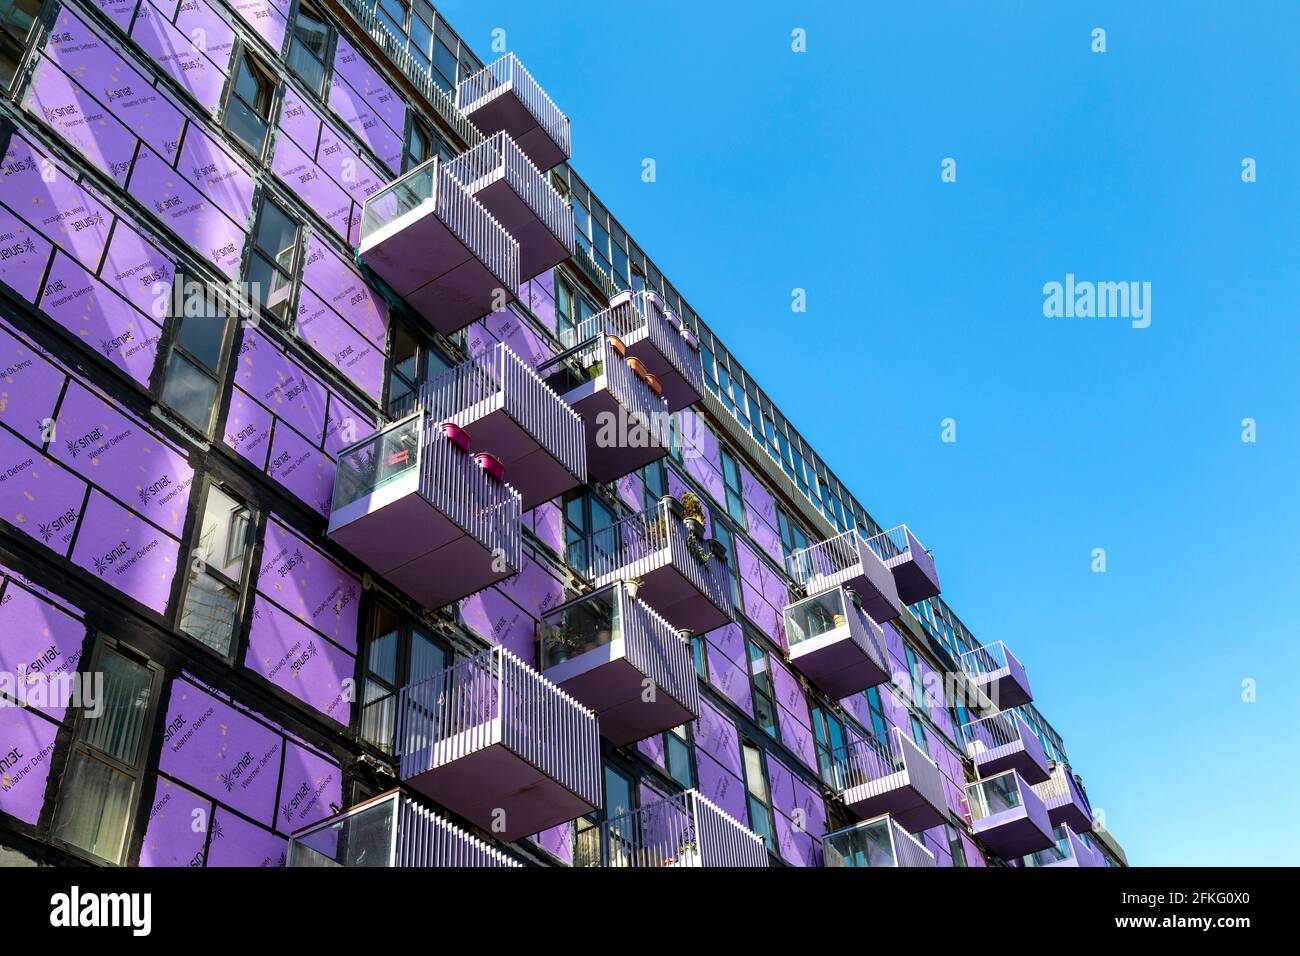 1 May 2021, London, UK - The Stratford Halo development with cladding stripped off, the cladding scandal in the UK emerged in the wake of the Grenfell Tower fire after fire safety regulations have been changed for flammable cladding to be removed Stock Photo